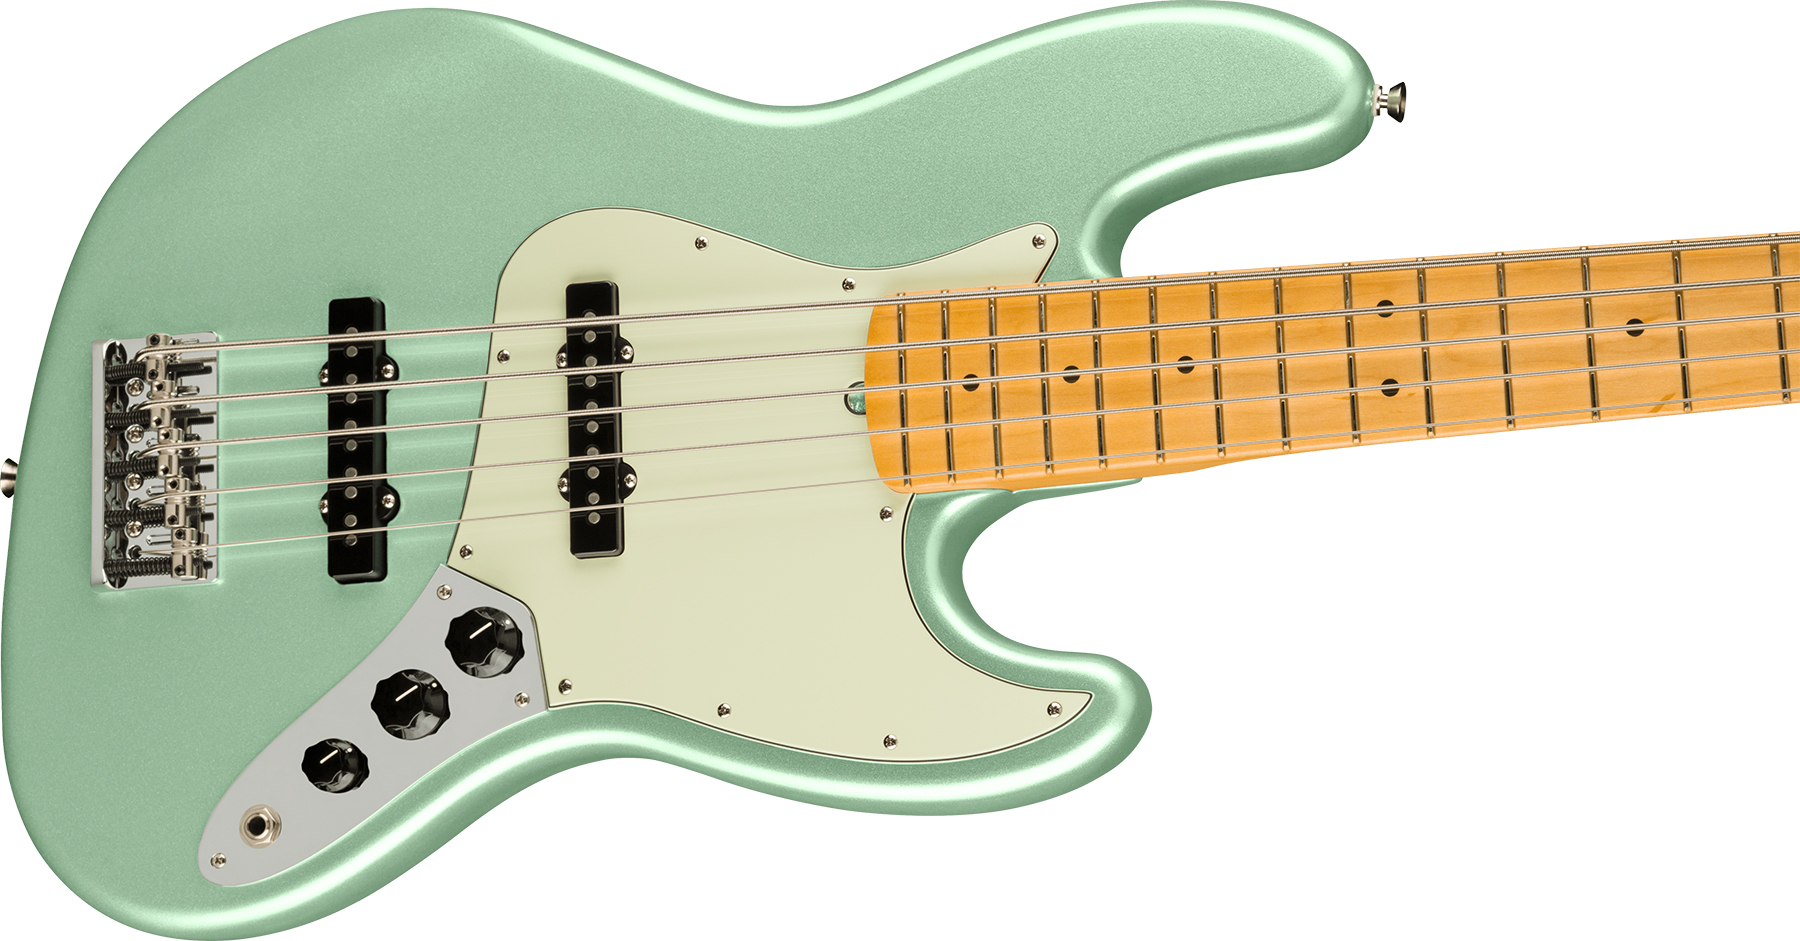 Fender Jazz Bass V American Professional Ii Usa 5-cordes Mn - Mystic Surf Green - Solid body electric bass - Variation 2